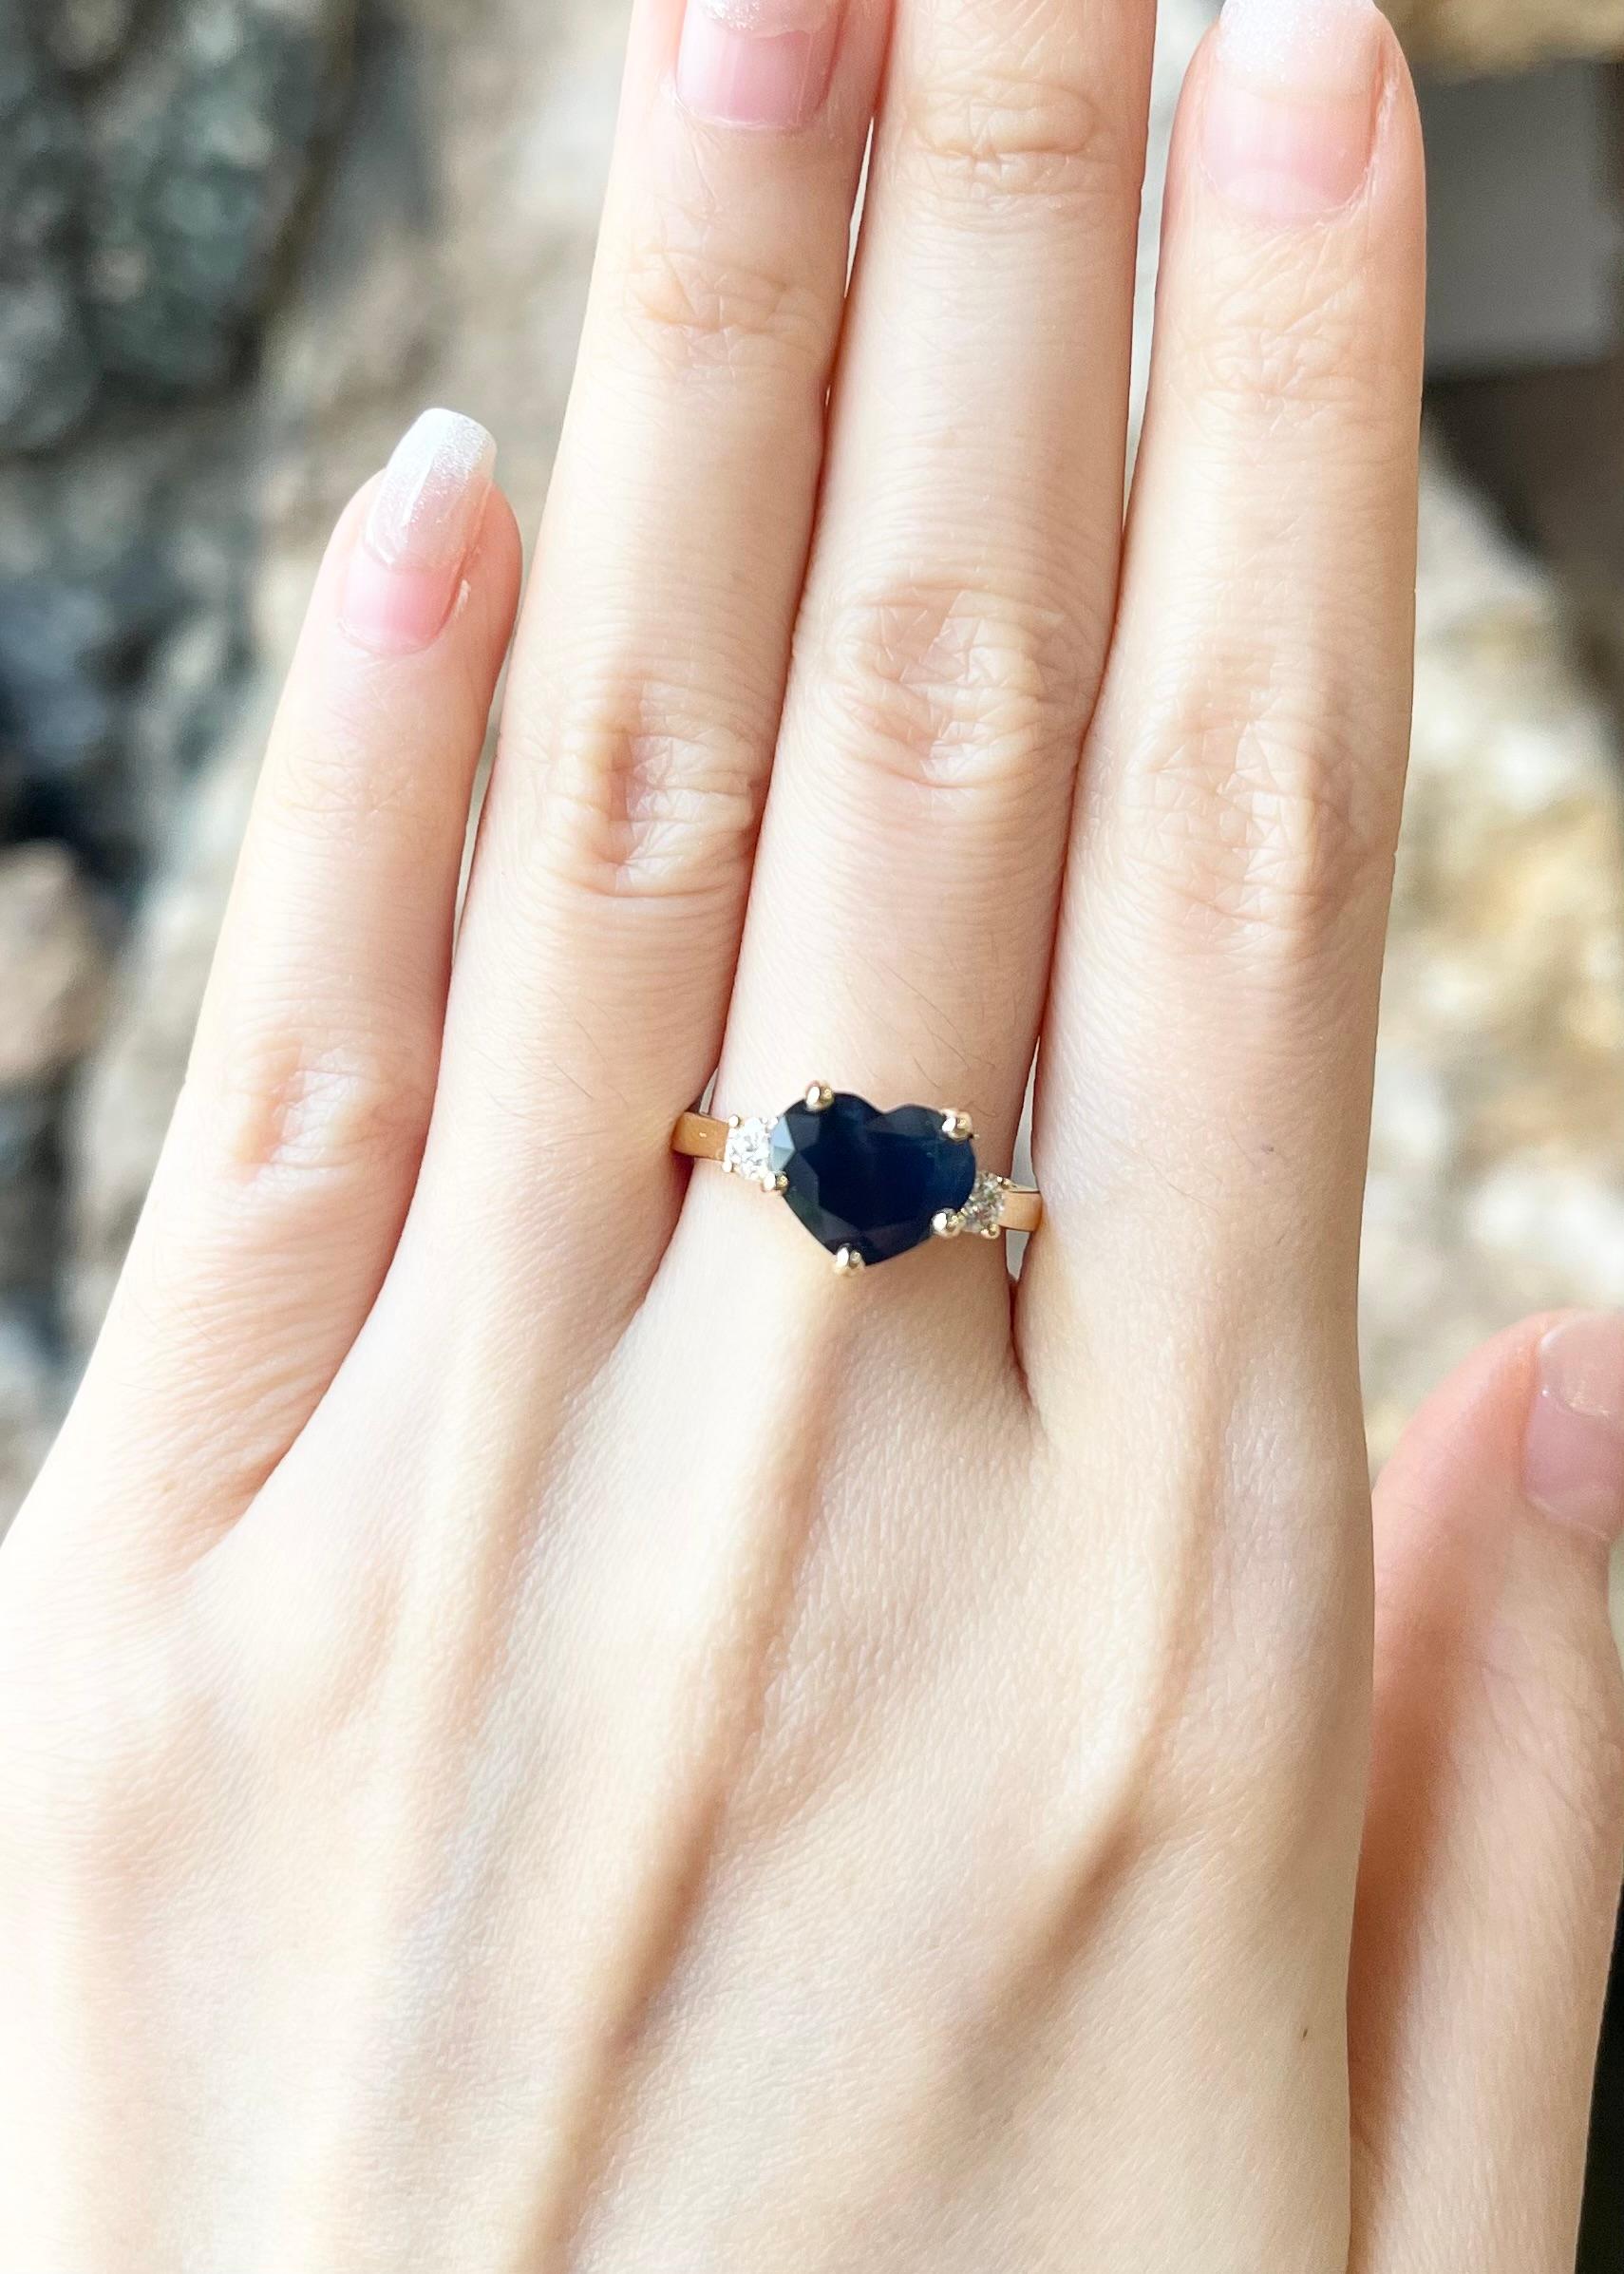 Blue Sapphire 2.94 carats with Diamond 0.22 carat Ring set in 18K Gold Settings

Width:  0.9 cm 
Length: 0.8 cm
Ring Size: 54
Total Weight: 5.15 grams

